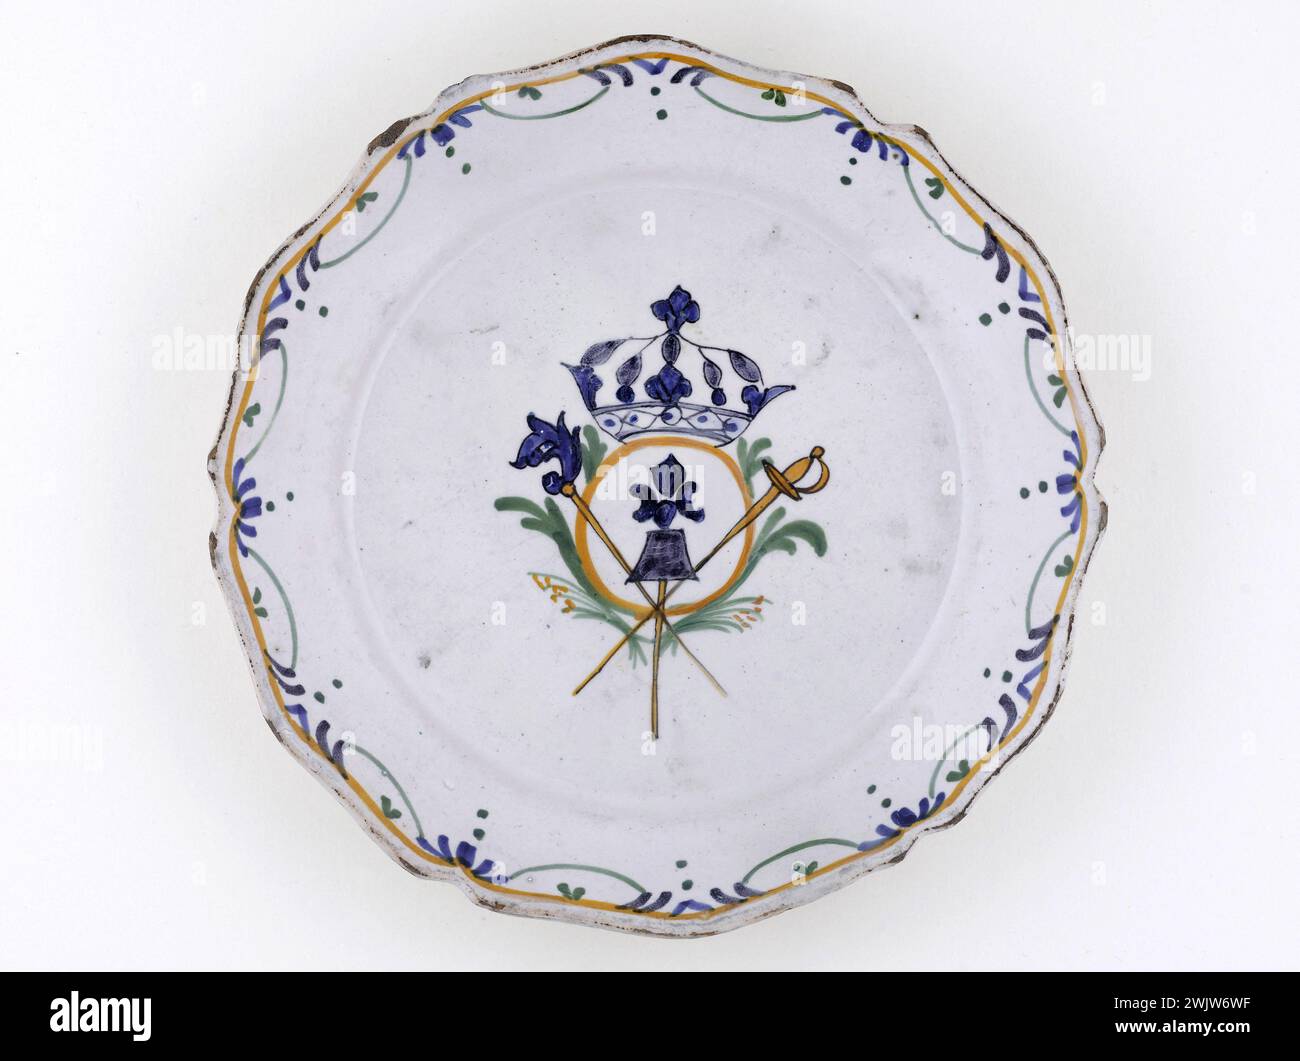 Anonymous. Plate. Earthenware. Around 1789. Paris, Carnavalet museum. 70955-9 Weapon, Crown, Epee, Faience, Flower, Decorative Pattern, Revolutionary Periode, French Revolution, Crockery, Plate Stock Photo